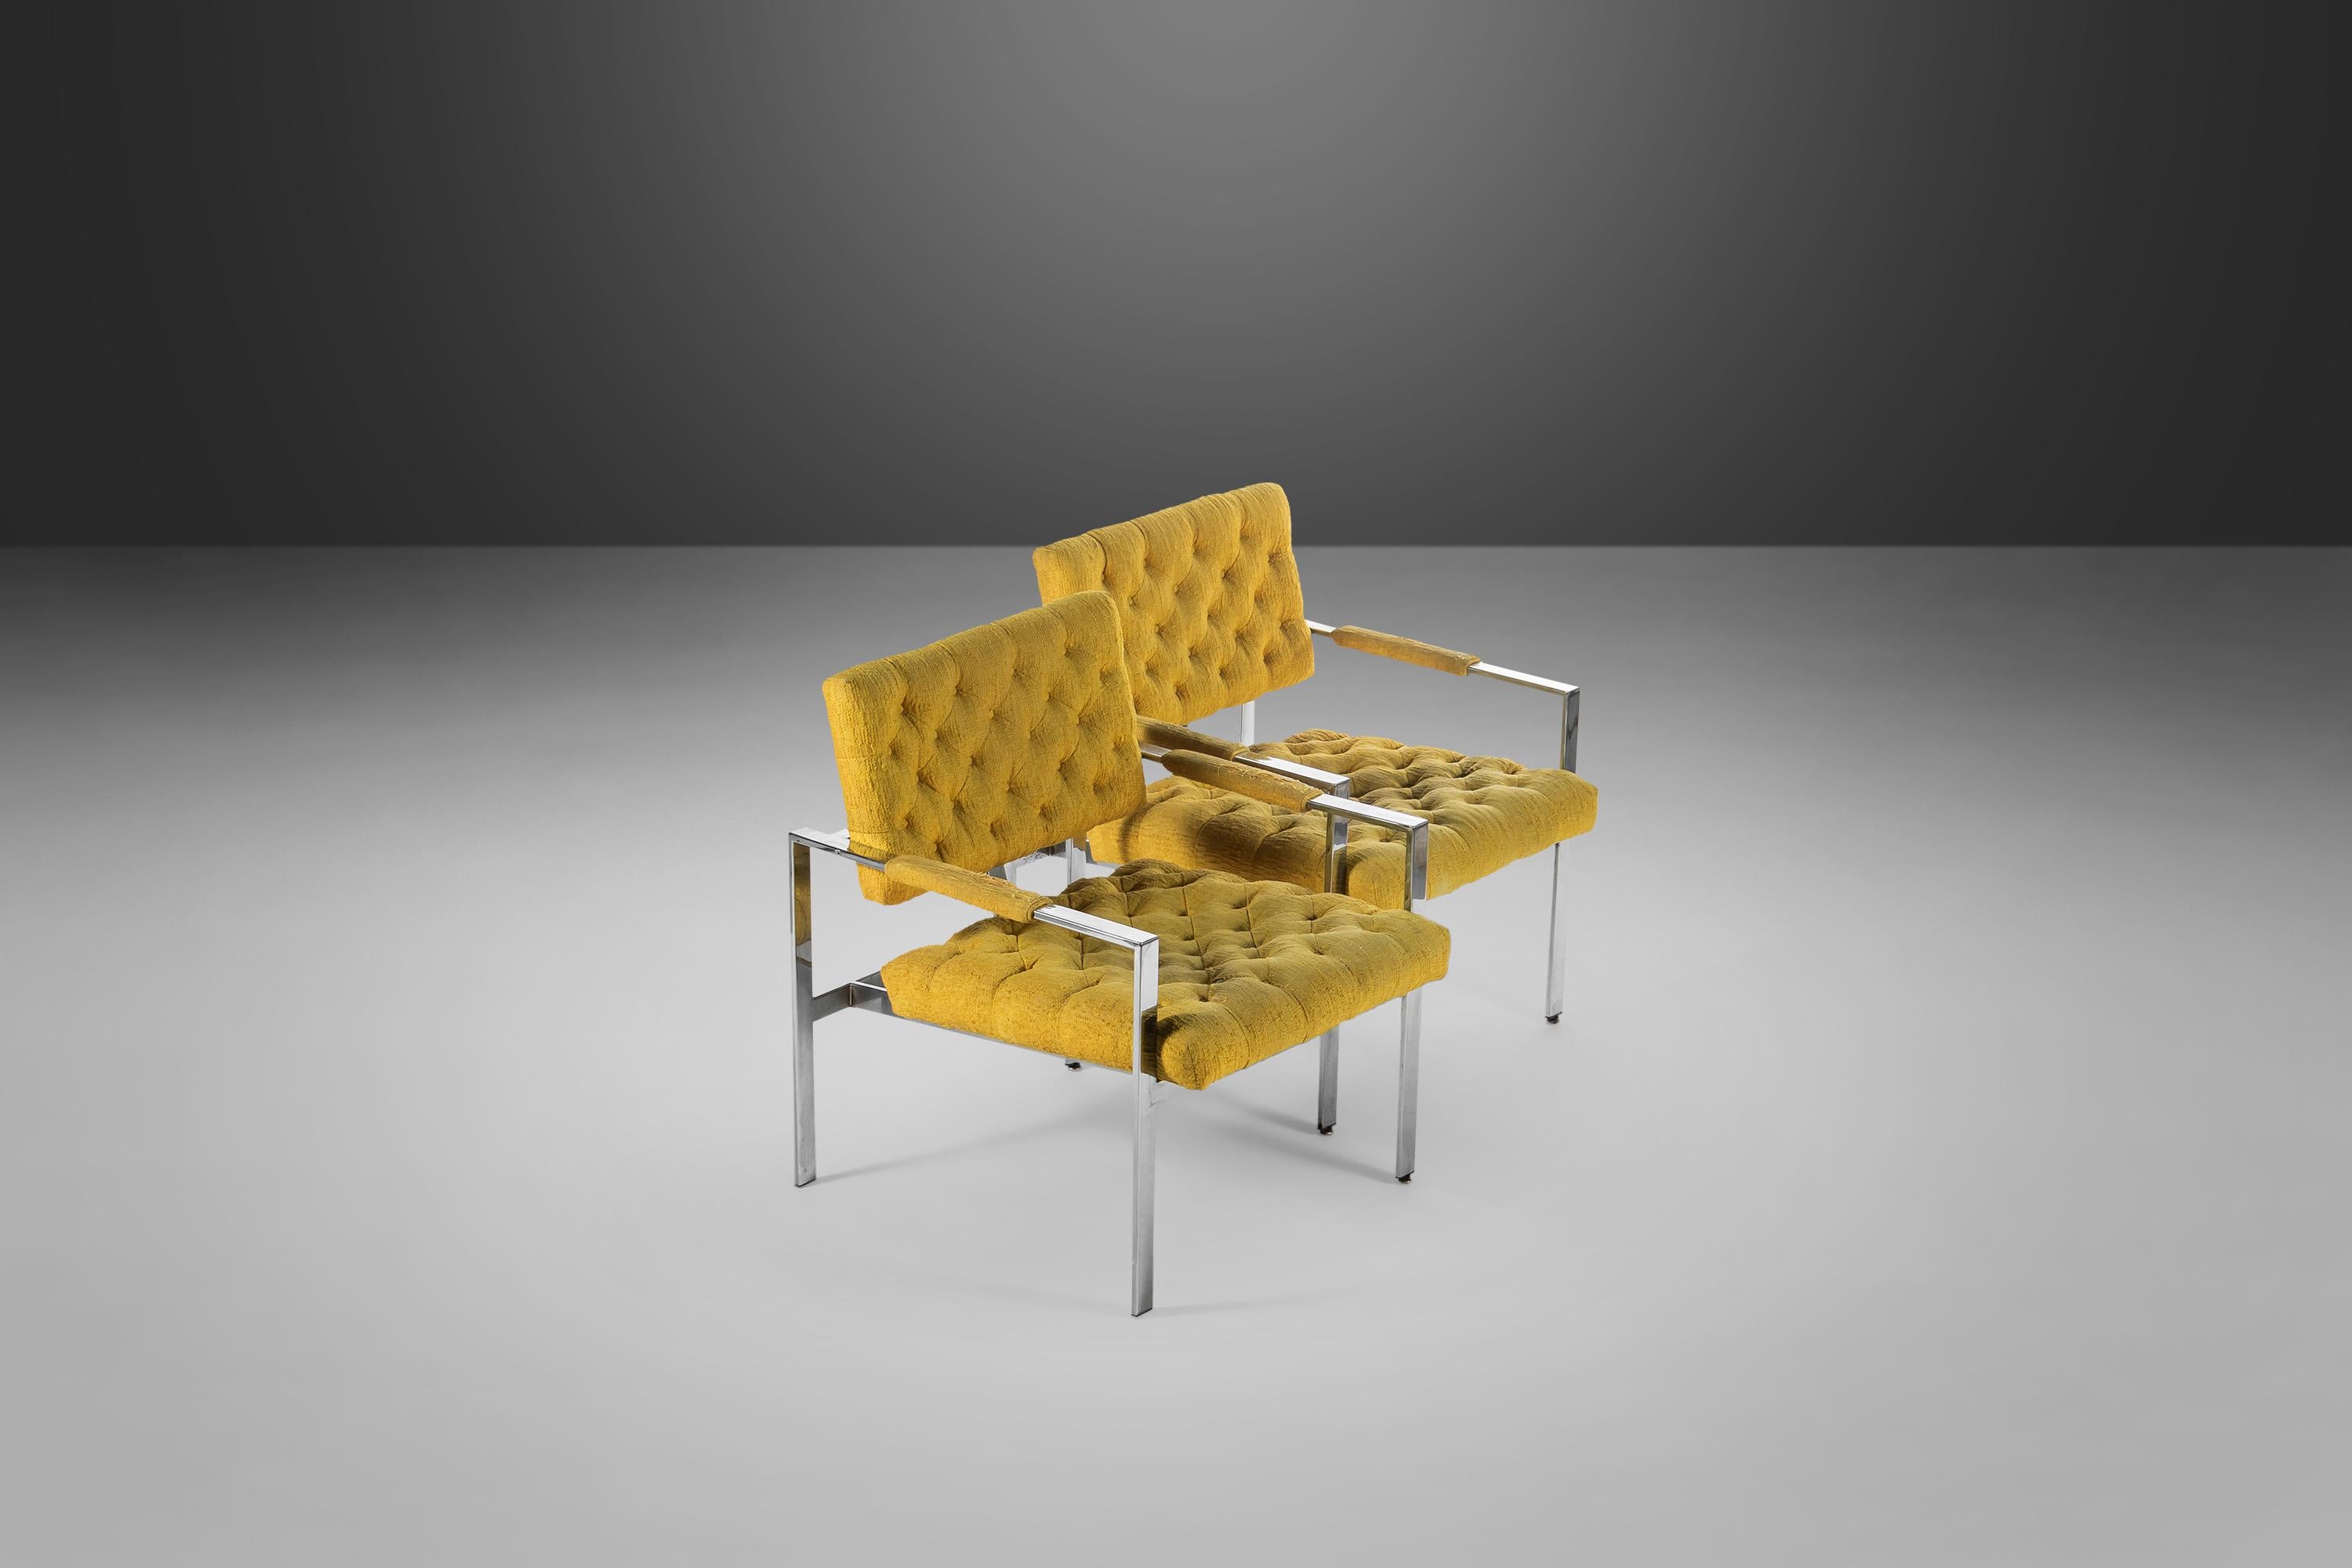 Iconic. Stylish. Bold. These fabulous chairs by Milo Baughman are arguably some of the best metalworks produced by iconic designer. With striking austere lines, eye-catching canary-yellow woolen fabric, and the brilliant reflective chrome surfaces